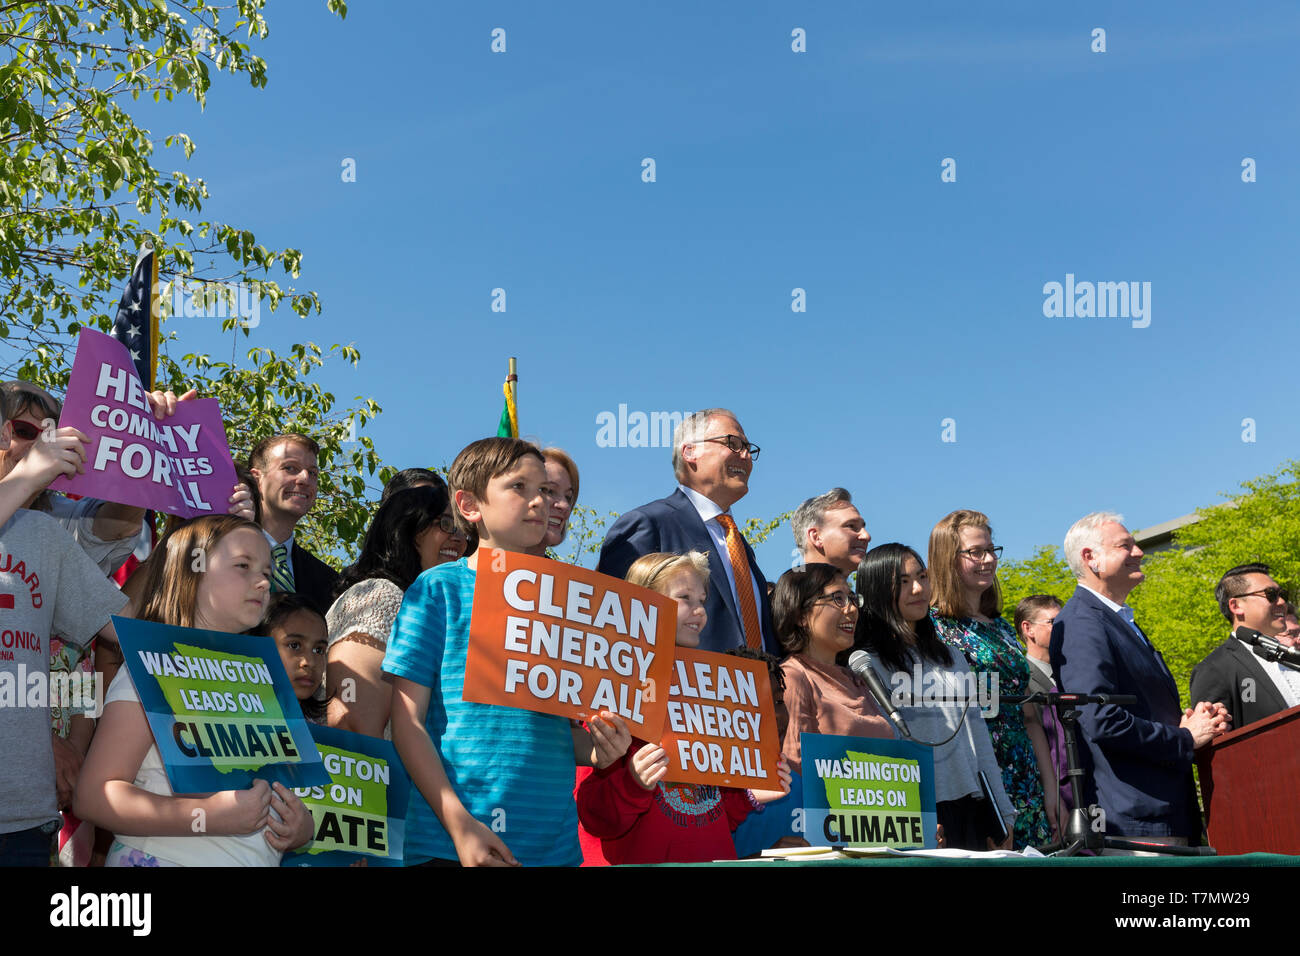 Seattle, Washington: Governor and 2020 presidential candidate Jay Inslee poses with supporters and state and local legislators after signing the nation’s strongest clean energy bill at Neighborhood House in the Rainier Vista neighborhood. The legislation, introduced by the governor in December, includes a 100 percent clean energy bill, a first-in-the-nation clean buildings policy, a reduction of greenhouse gas emissions, and incentives to electrify transportation. Inslee has centered his presidential campaign around climate change and environmental issues. The event was held in the Rainier Vis Stock Photo